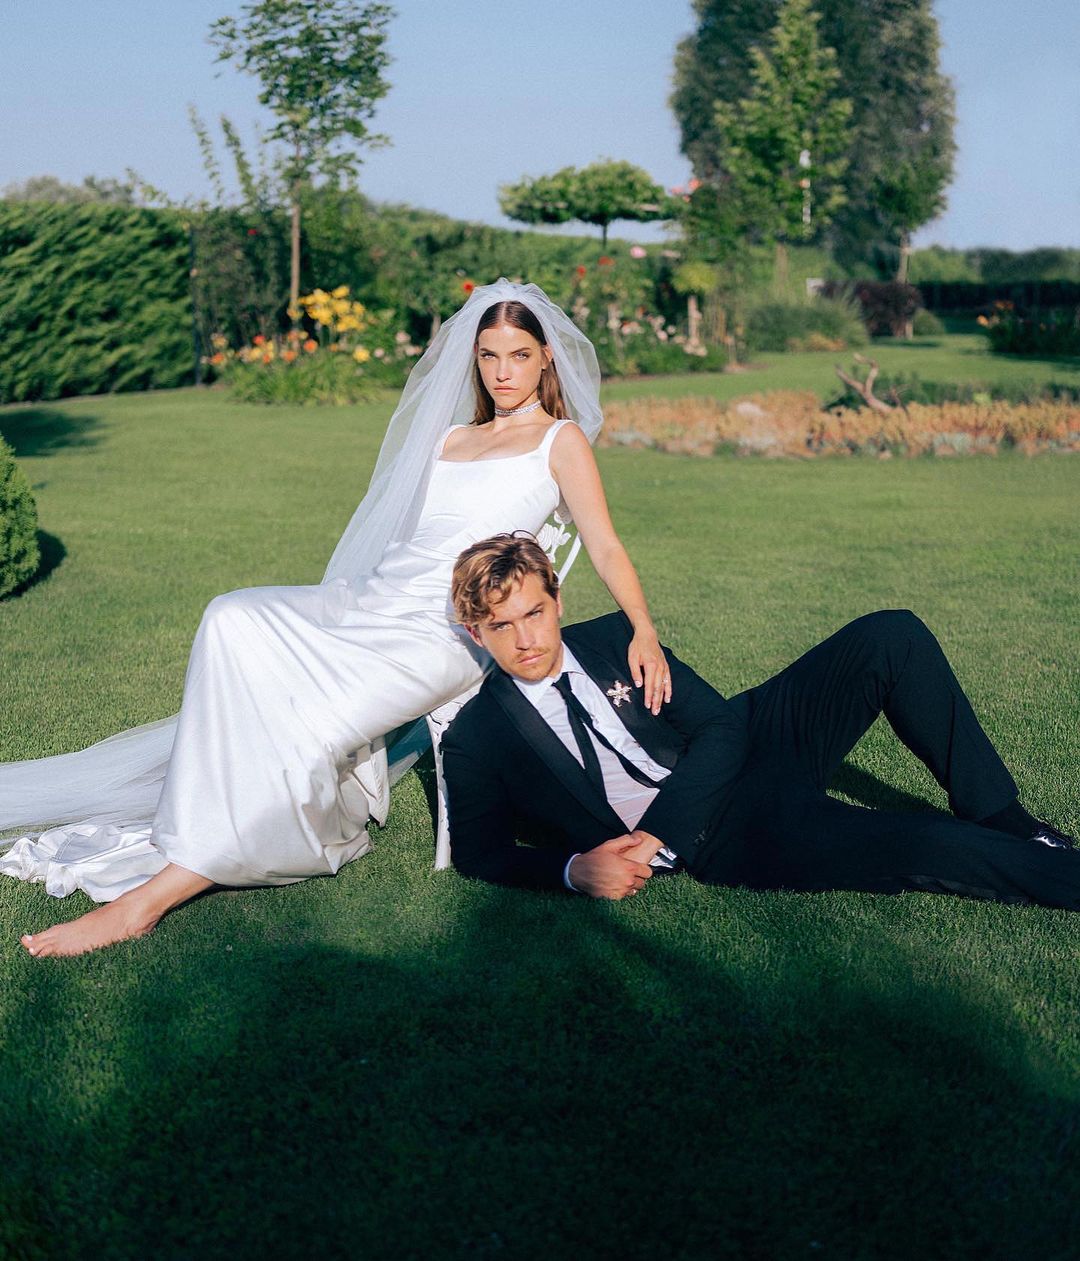 Barbara Palvin and Dylan Sprouse Just Tied the Knot in a Cozy Countryside Wedding in Hungary - Wedded Wonderland